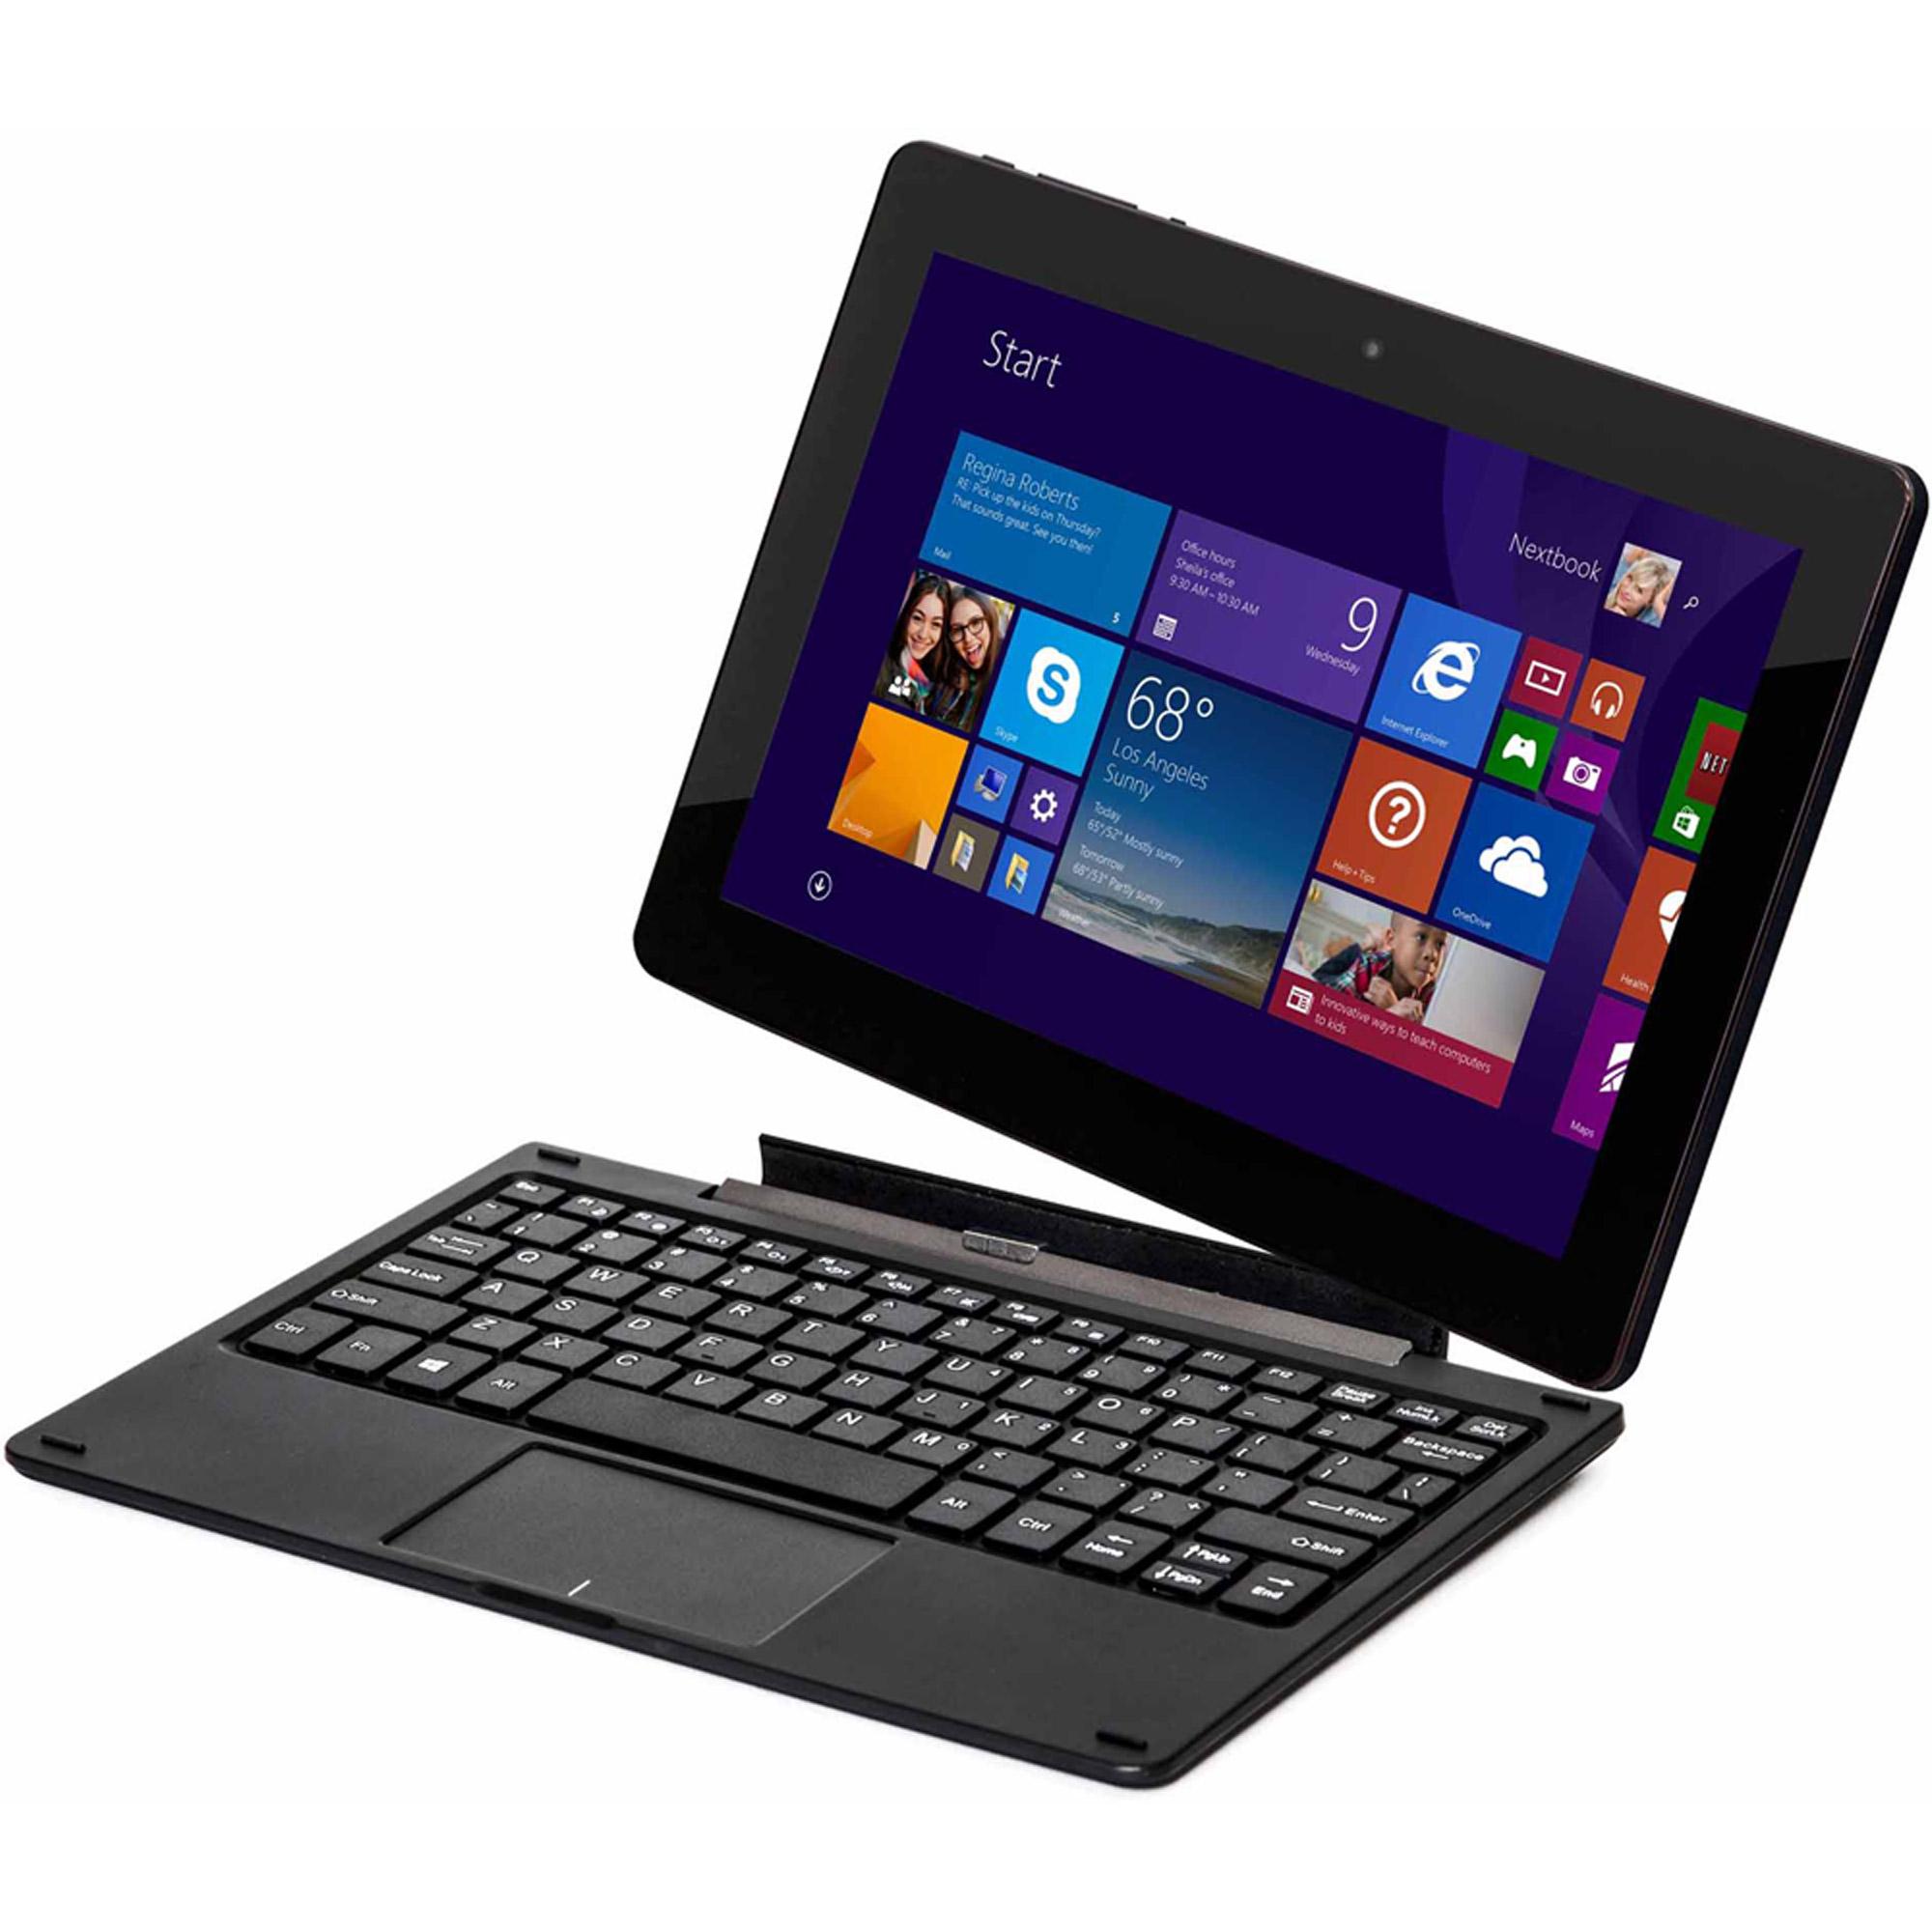 Penta T-Pad WS1001Q with a detachable keyboard